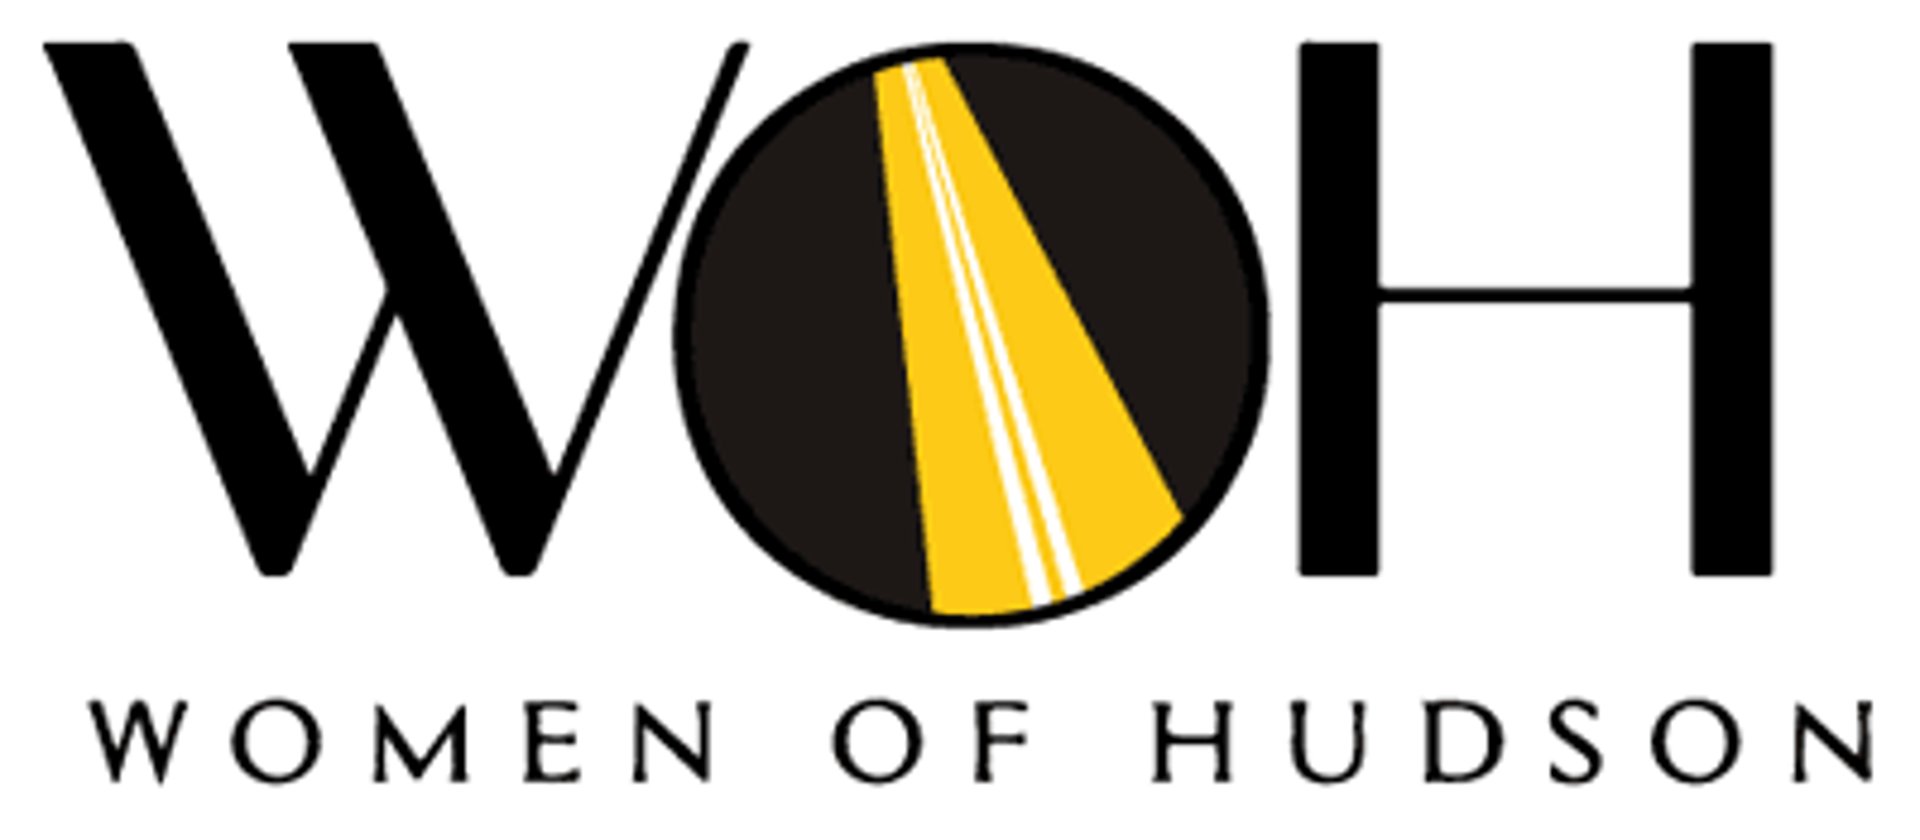 WHAT IS WOMEN OF HUDSON?